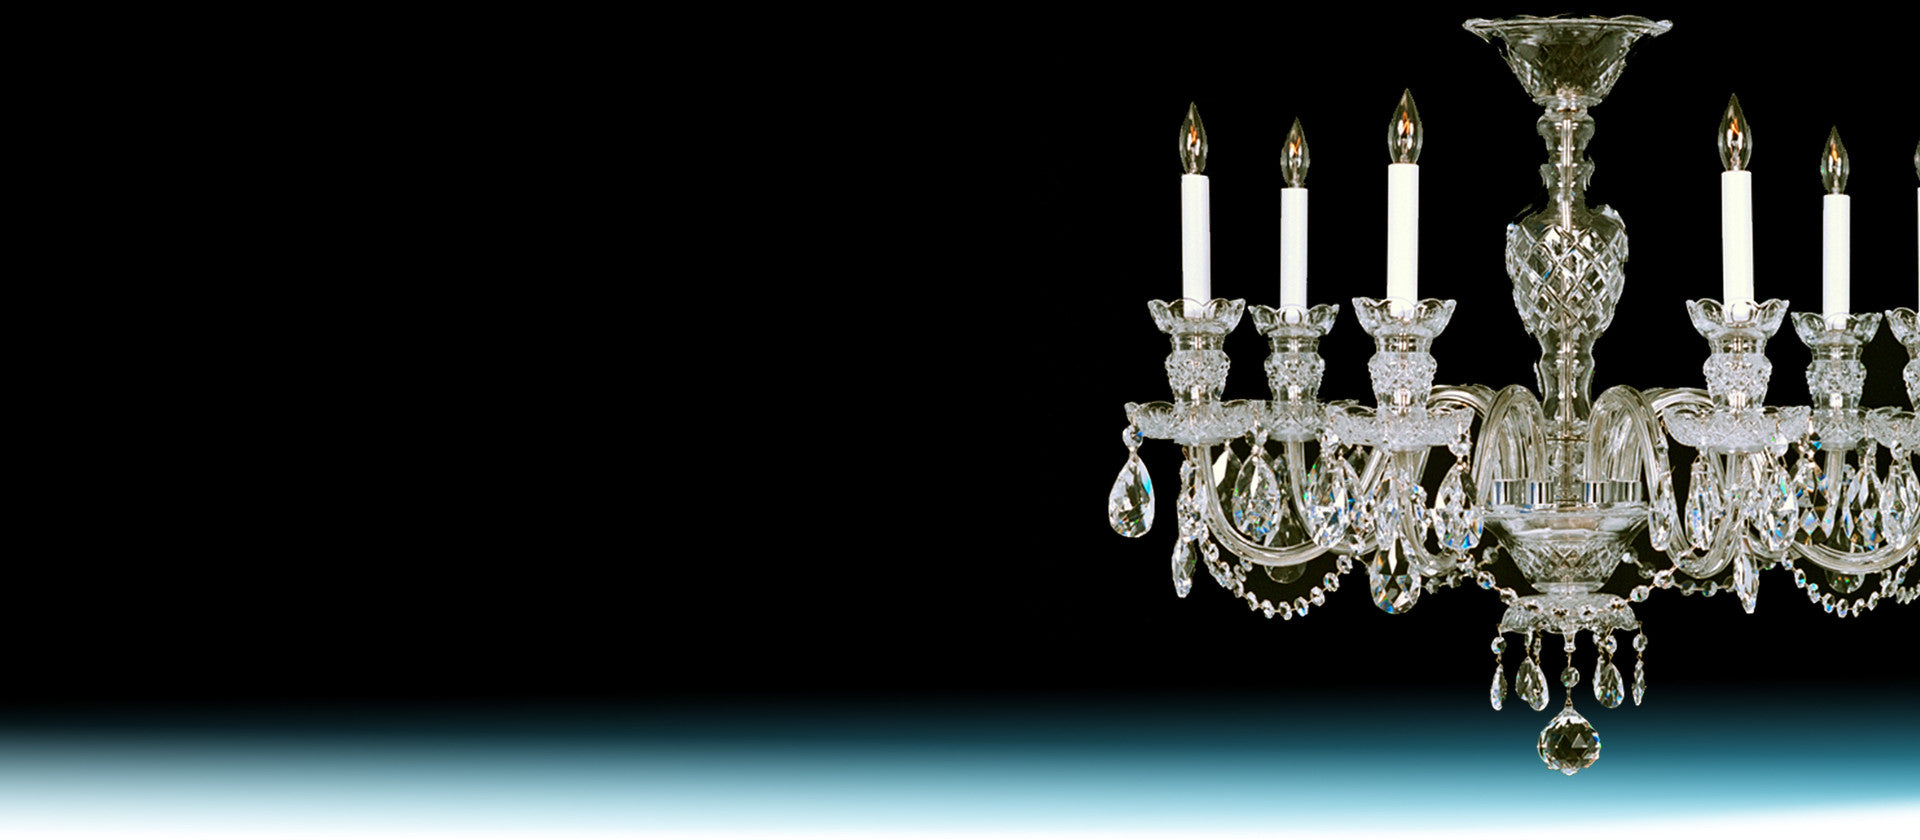 America’s favorite crystal chandelier maker for 80 years. Affordable, crystal chandeliers and sconces - specializing in Georgian, Victorian and Custom chandeliers and sconces. Buy direct from us and be assured that your chandelier is created just for you and shipped, safely, to your door.